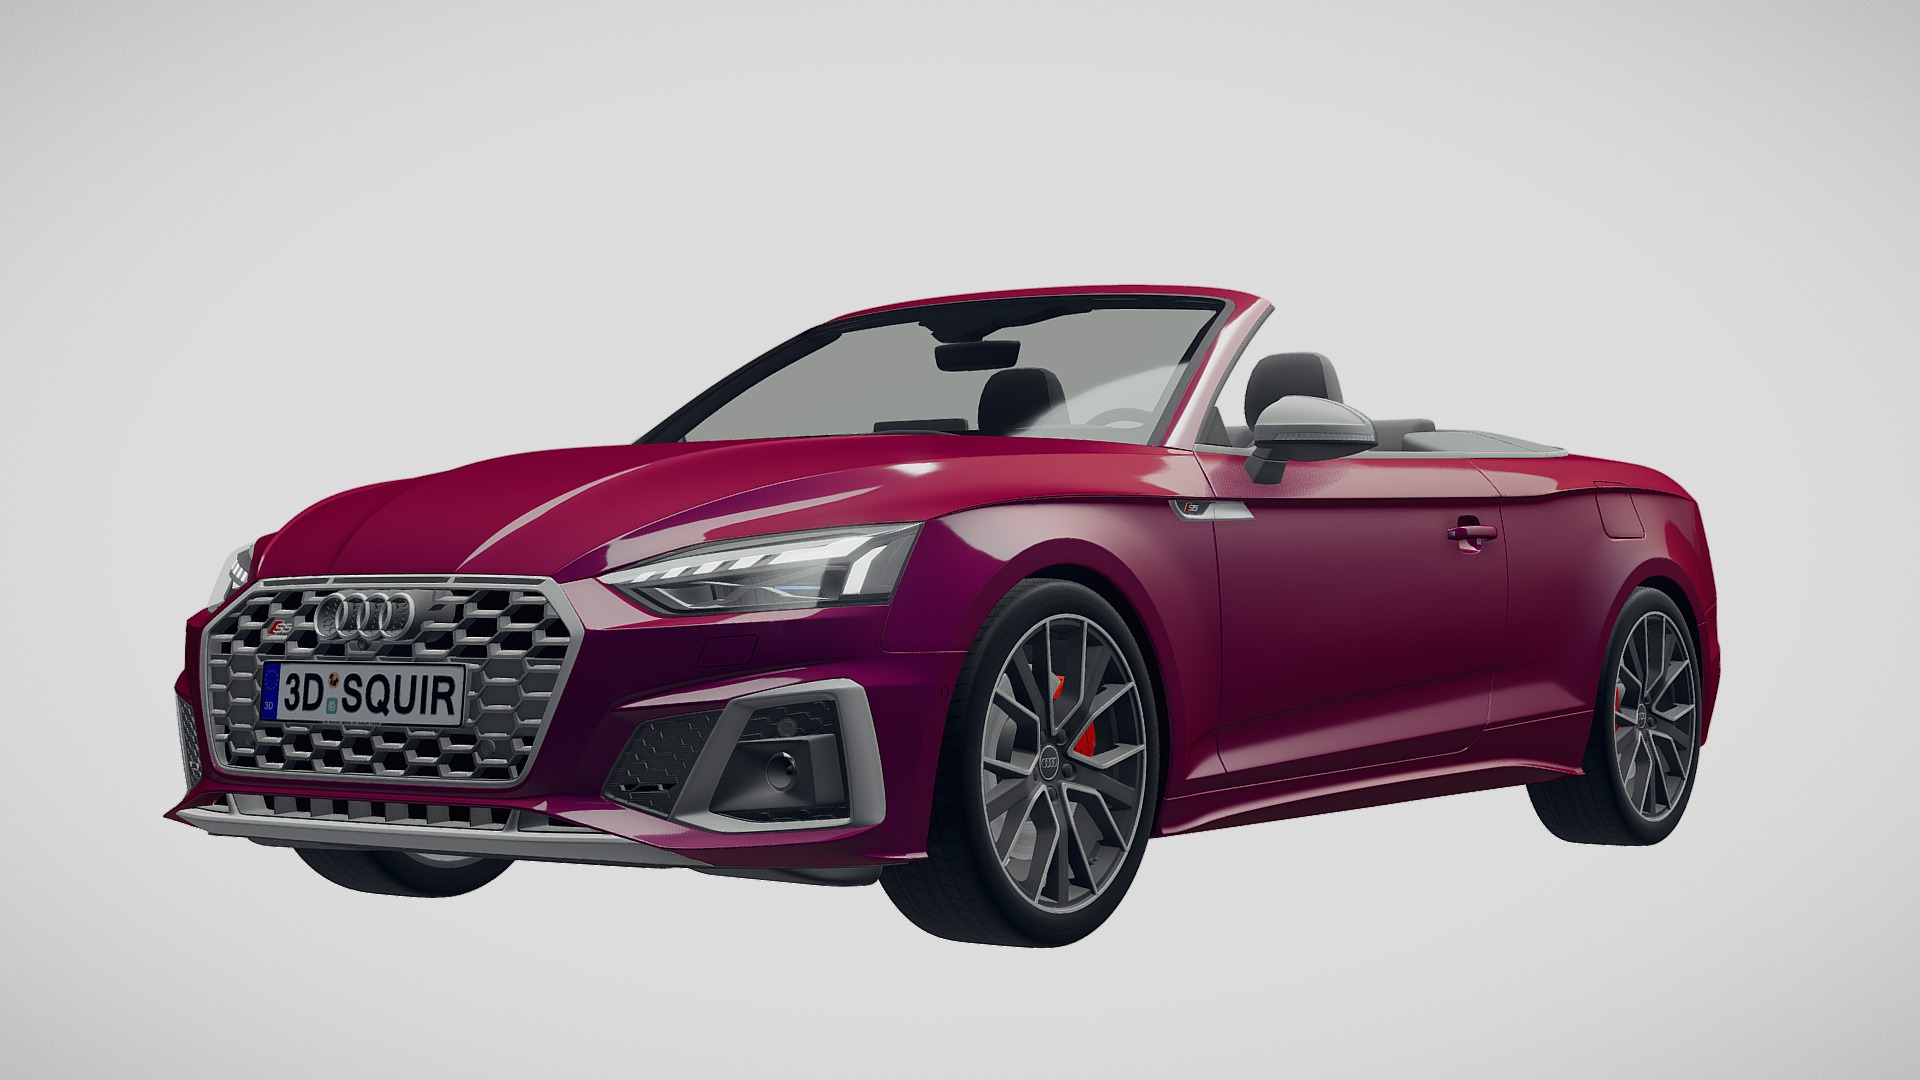 3D model Audi S5 Cabrio 2020 - This is a 3D model of the Audi S5 Cabrio 2020. The 3D model is about a red sports car.